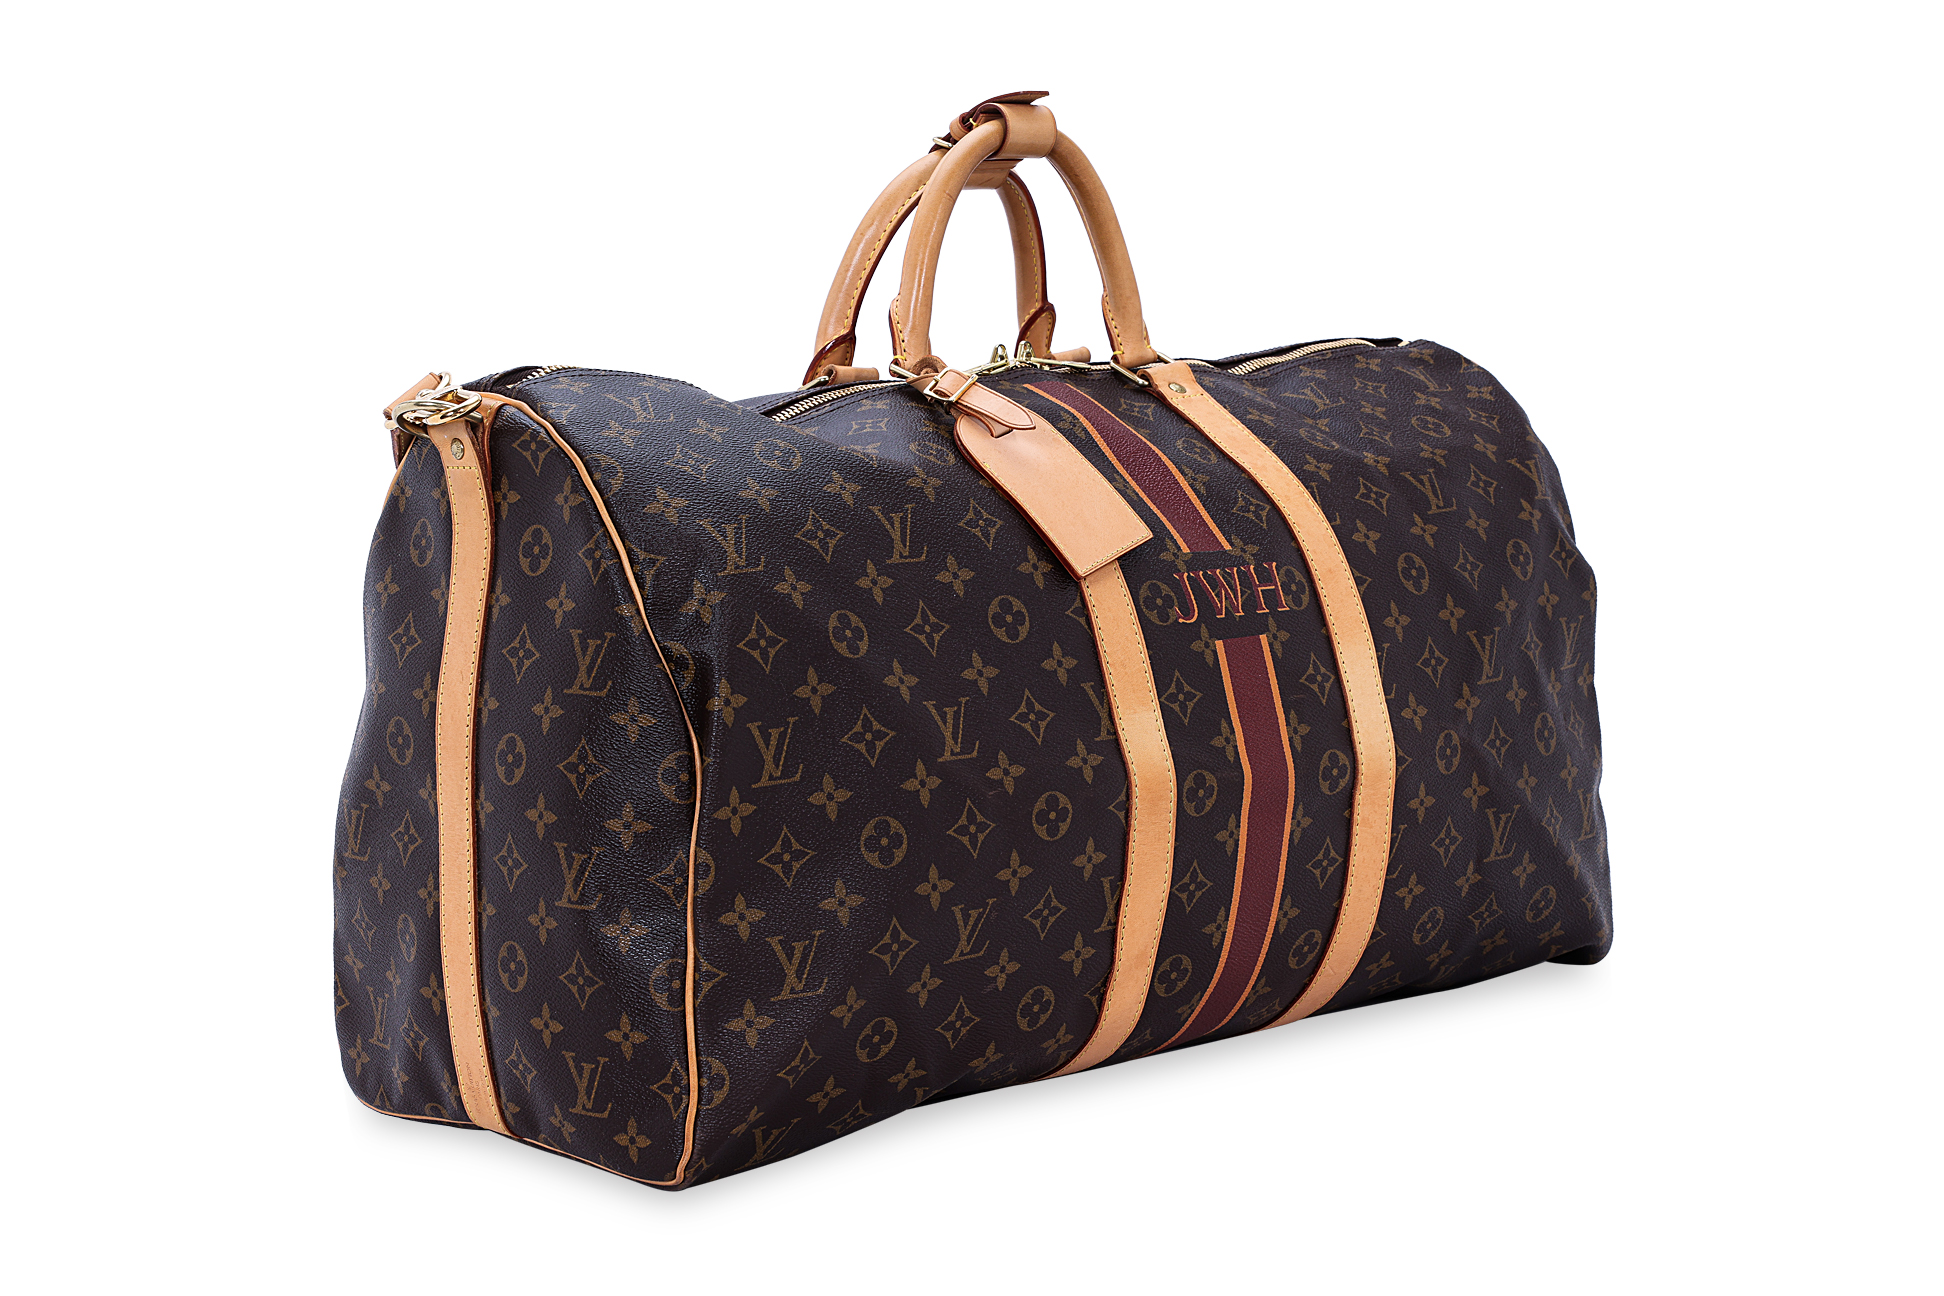 LOUIS VUITTON KEEPALL BANDOULIERE - Image 2 of 10